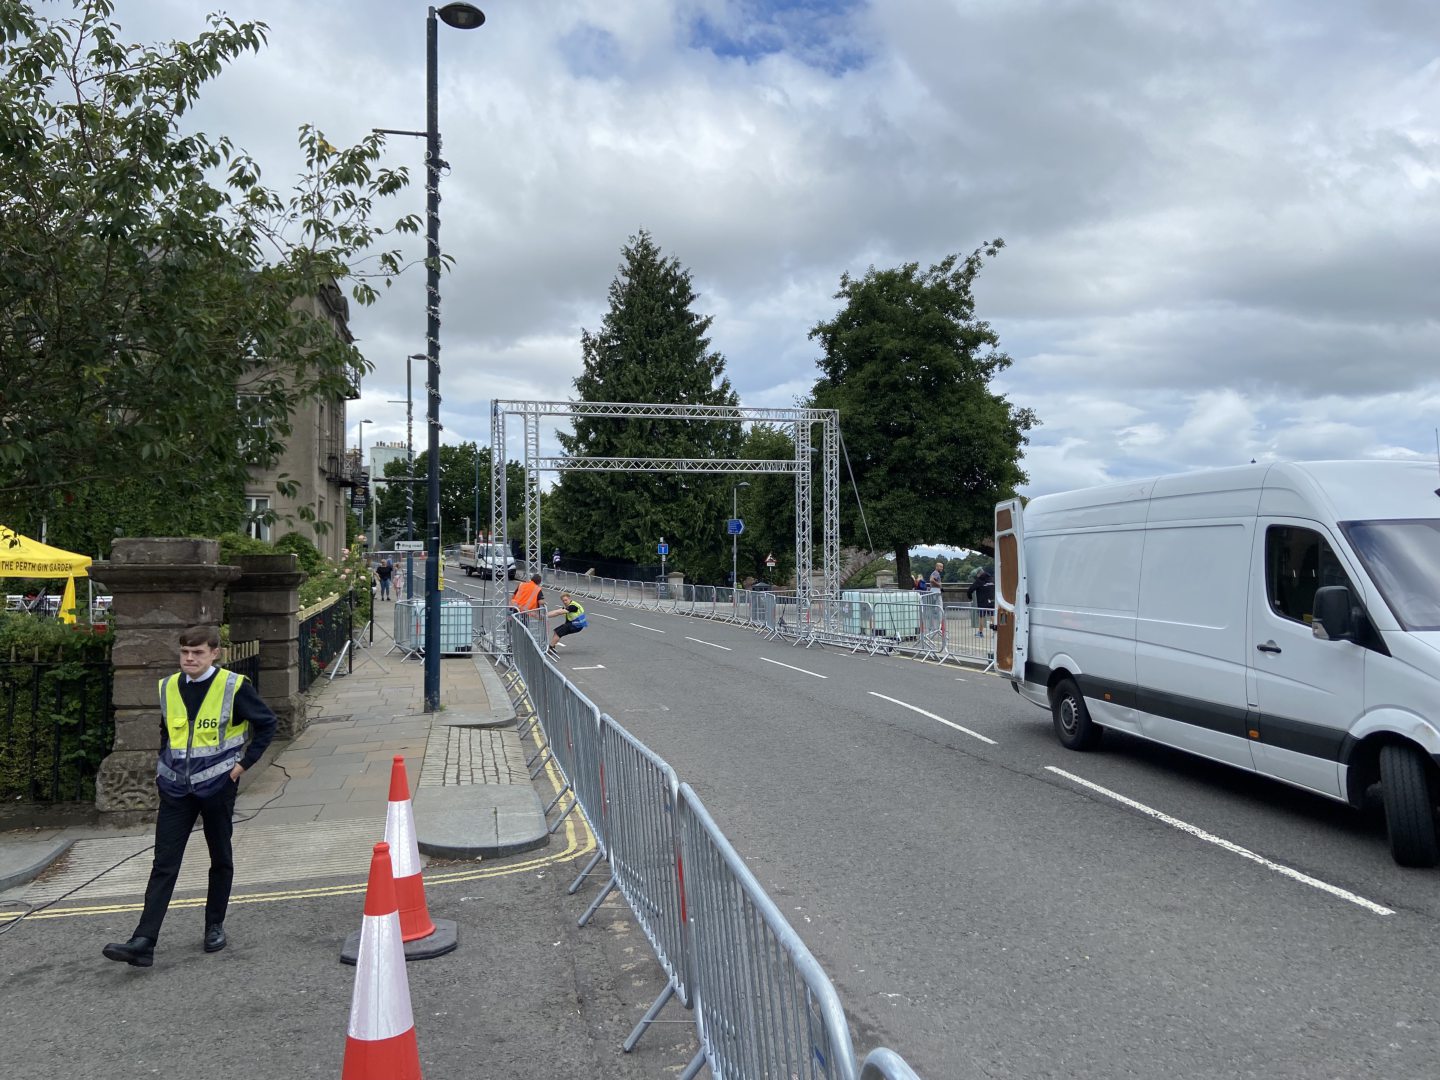 Tay Street is closed for the Gran Fondo